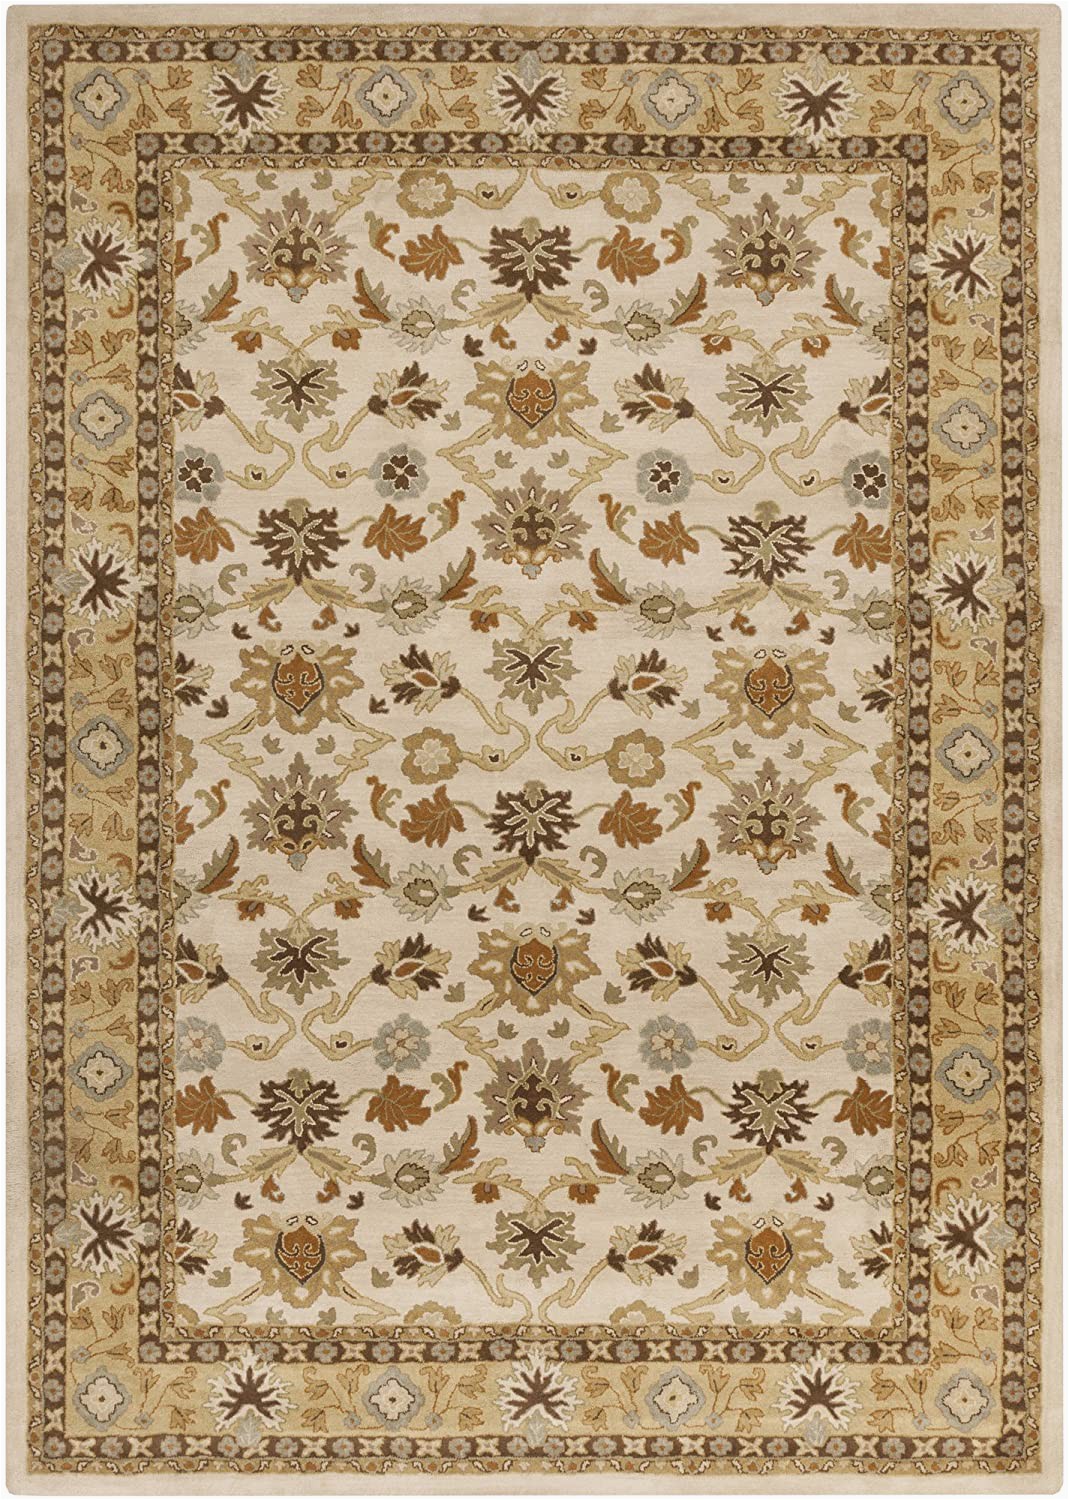 Hearth and Hand area Rugs Surya area Rug 2 X 4 Hearth Beige Tan Gold Black Light Blue Rust Sage Taupe